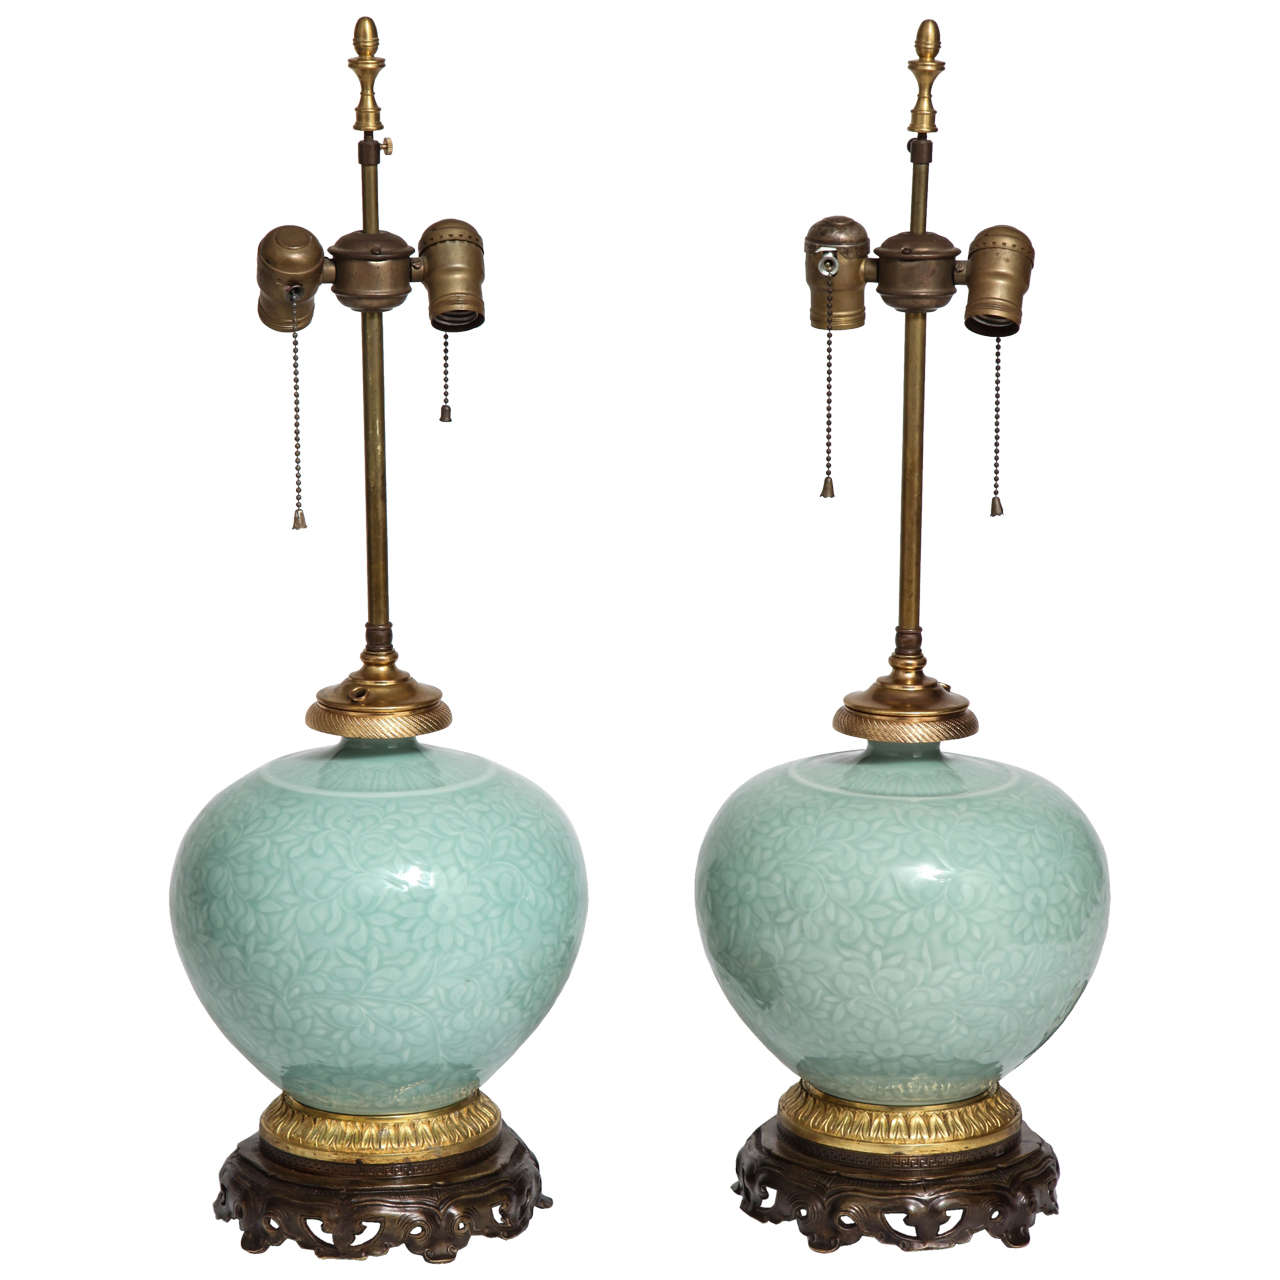 Pair of  Chinese Celadon Porcelain and Ormolu Mounted Vases as Lamps